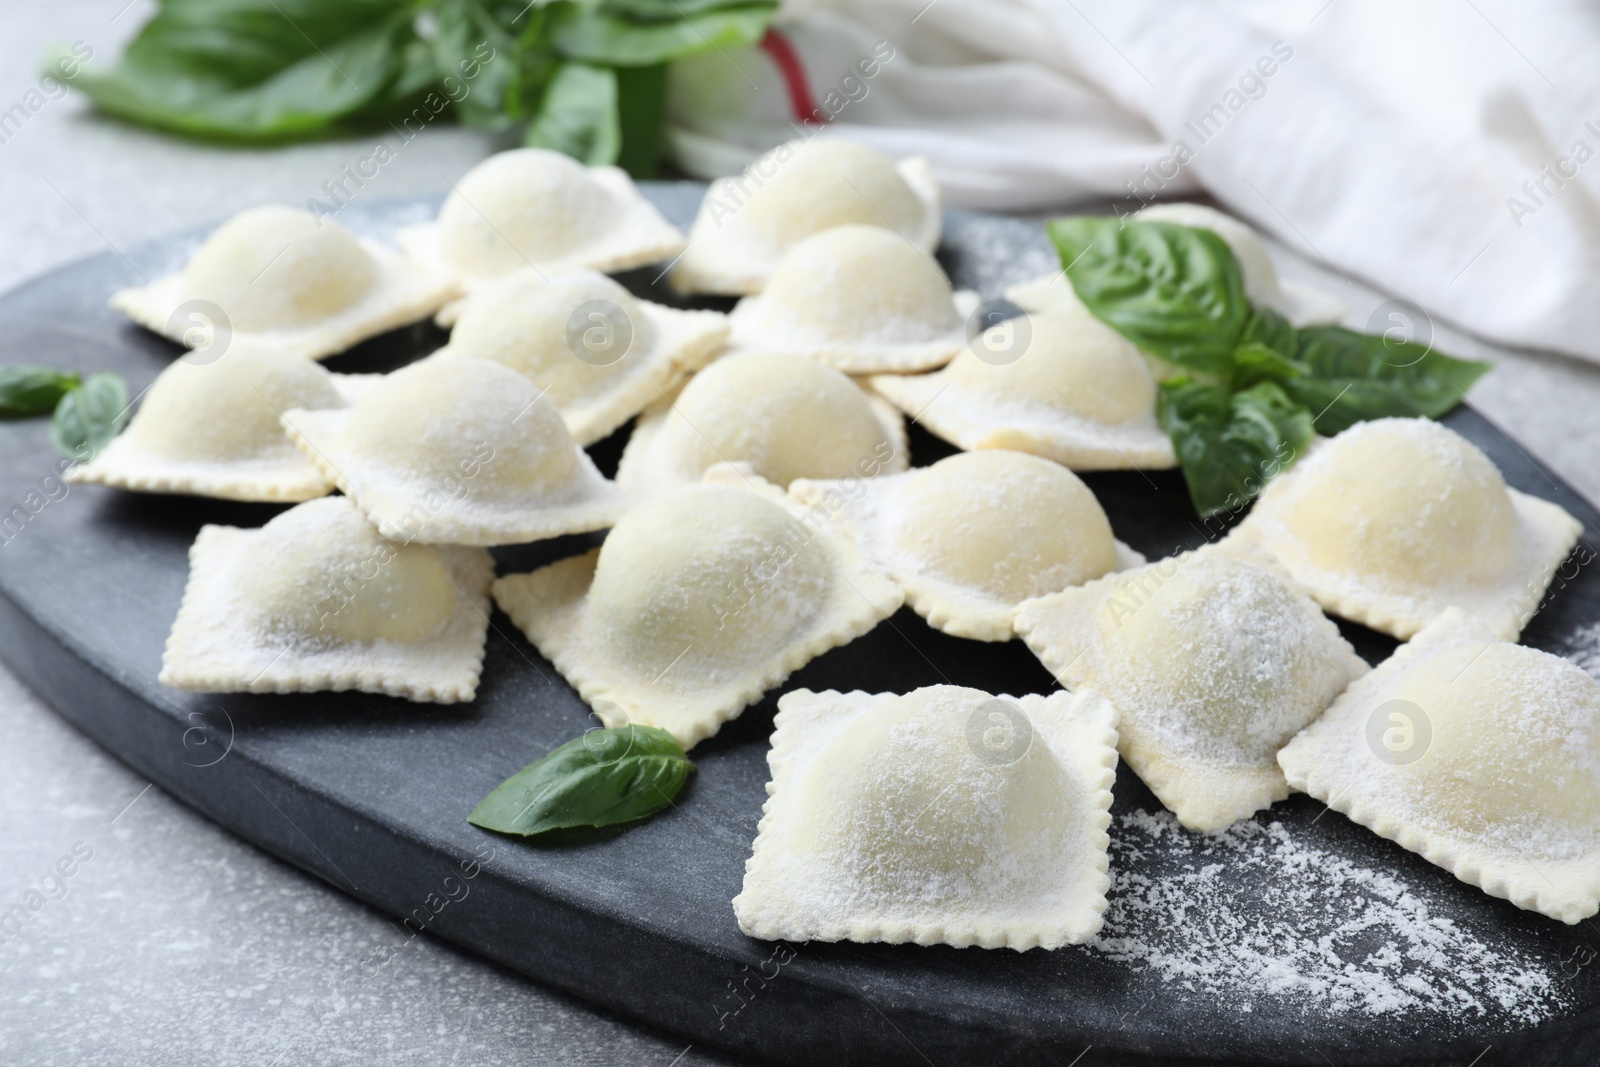 Photo of Homemade uncooked ravioli on board, closeup view